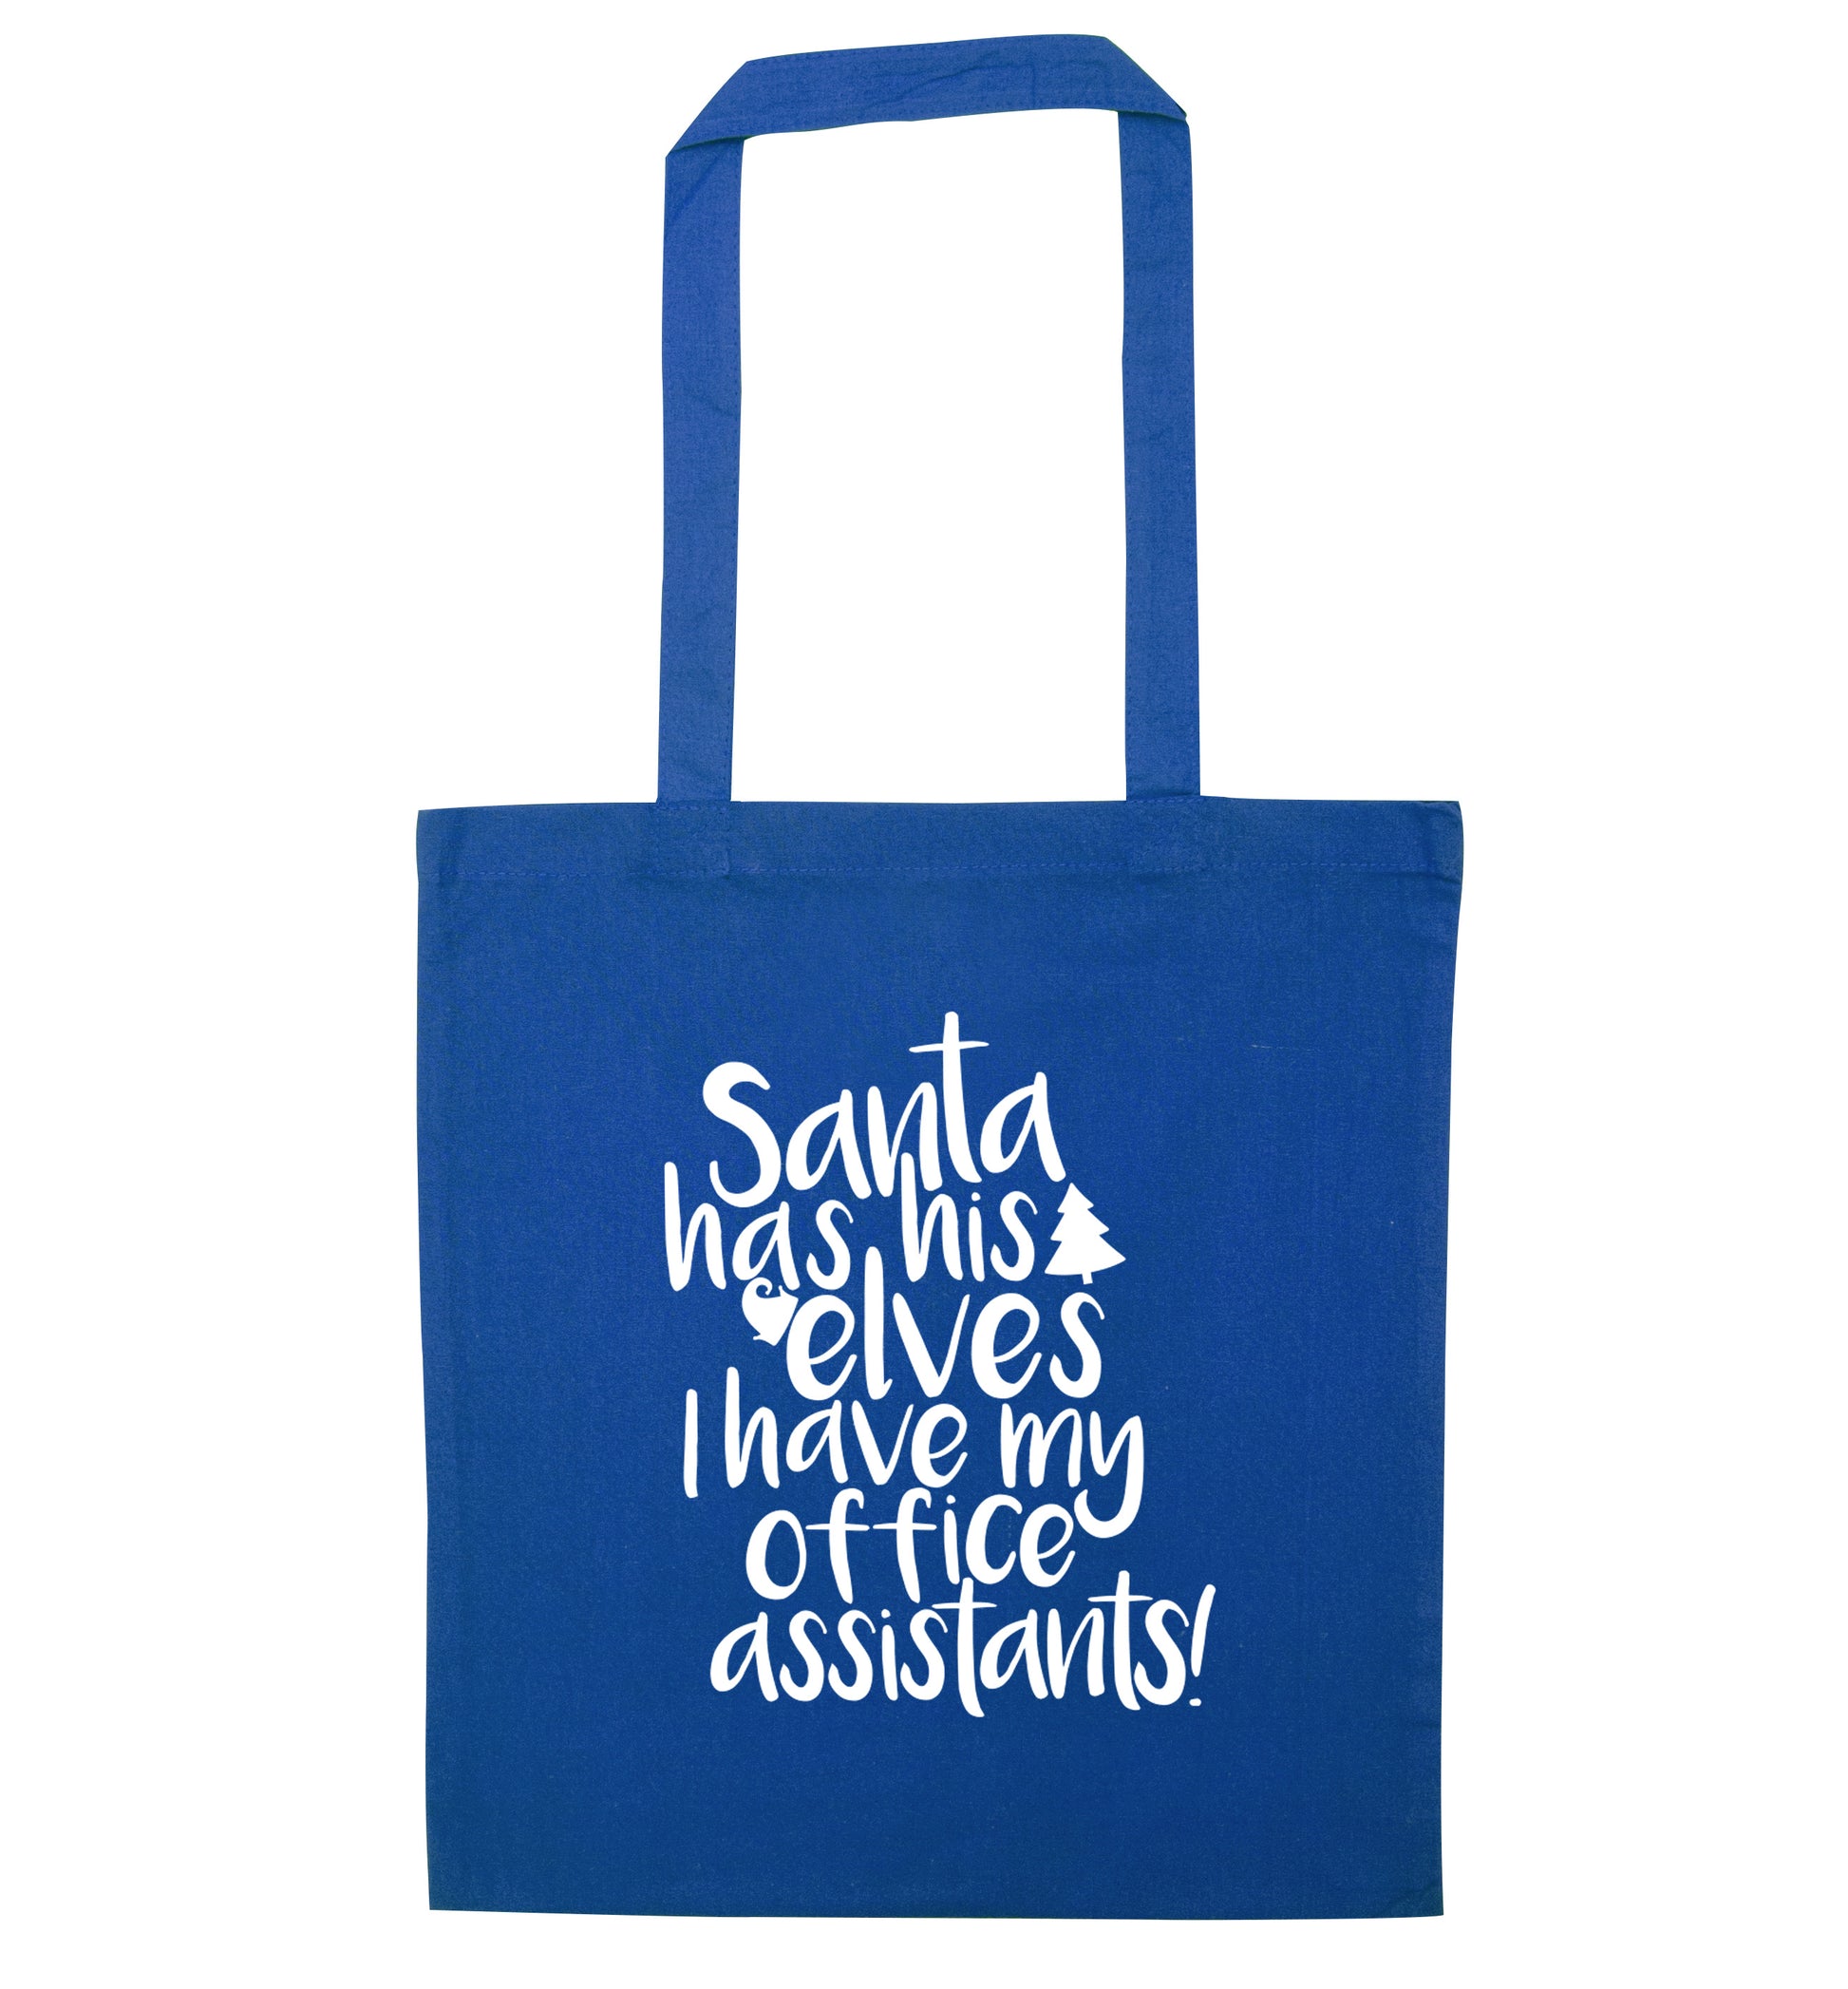 Santa has his elves I have my office assistants blue tote bag